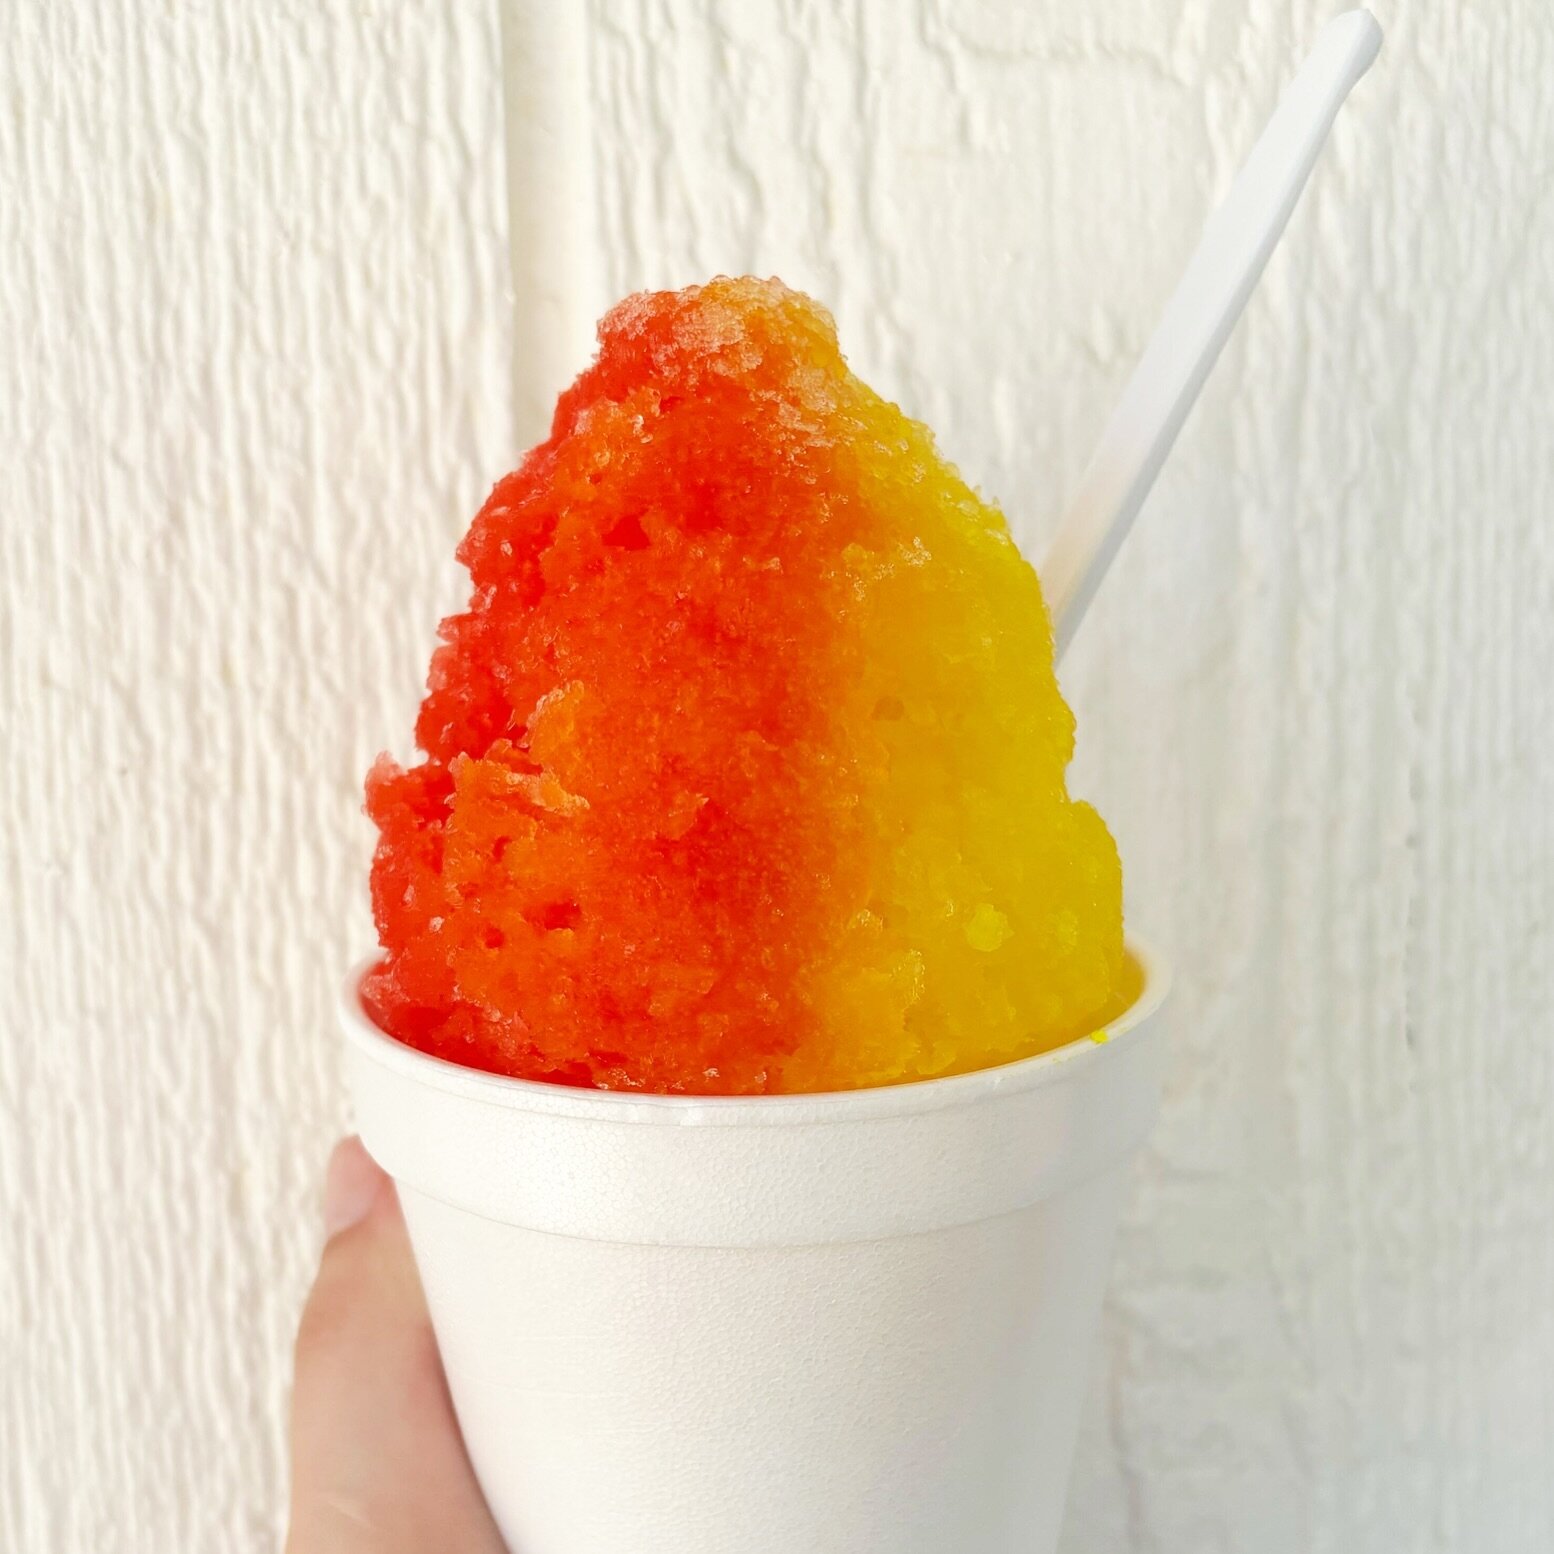 TIGER BLOOD + BANANA

Another customer creation👏🏻
Drop your favorite flavor combo below so we can try it out!

⏰OPEN 12-8 everyday 
📍Manvel, TX 
🚘Drive-Thru 

#manvel #manveltx #shavedice #weekleys #weekleysshavedice #snowcones #notsnowcones #htx